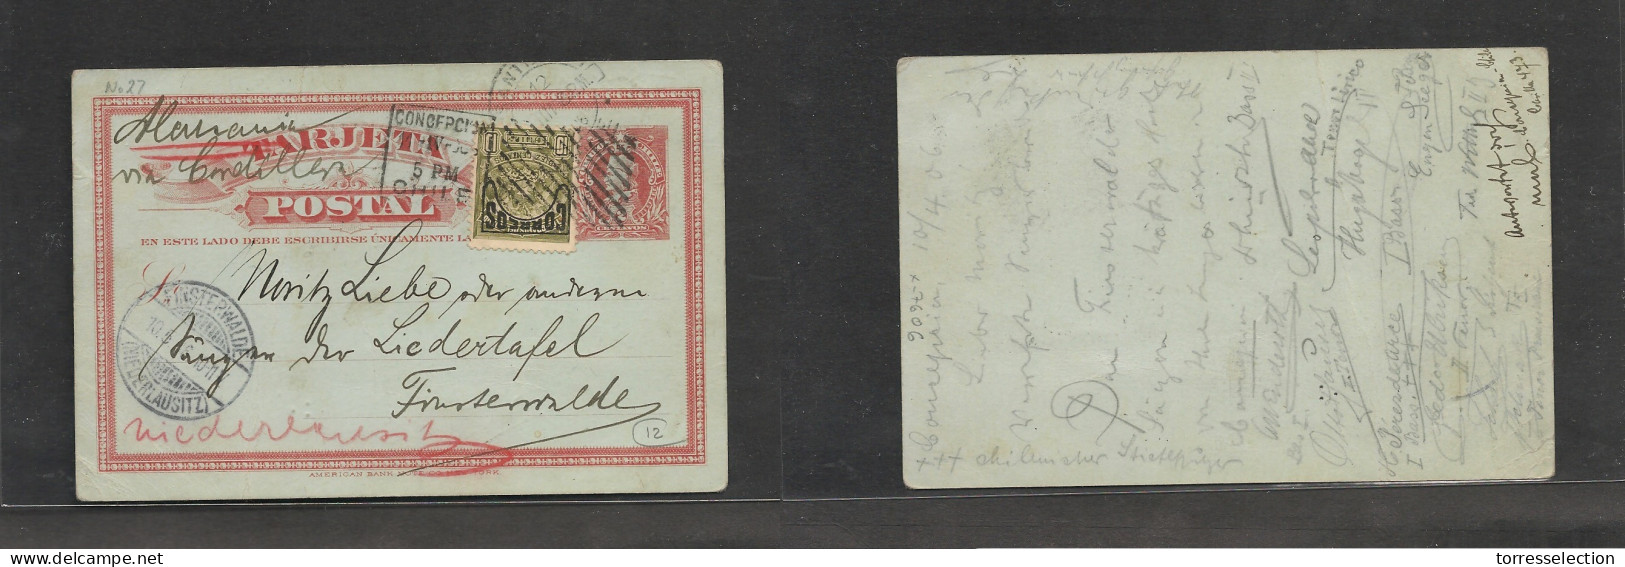 CHILE. Chile Cover - 1906 Concepcion To Germany Finsterwalde2c Red Stat Card+adtl Ovpted, Vf - Chile